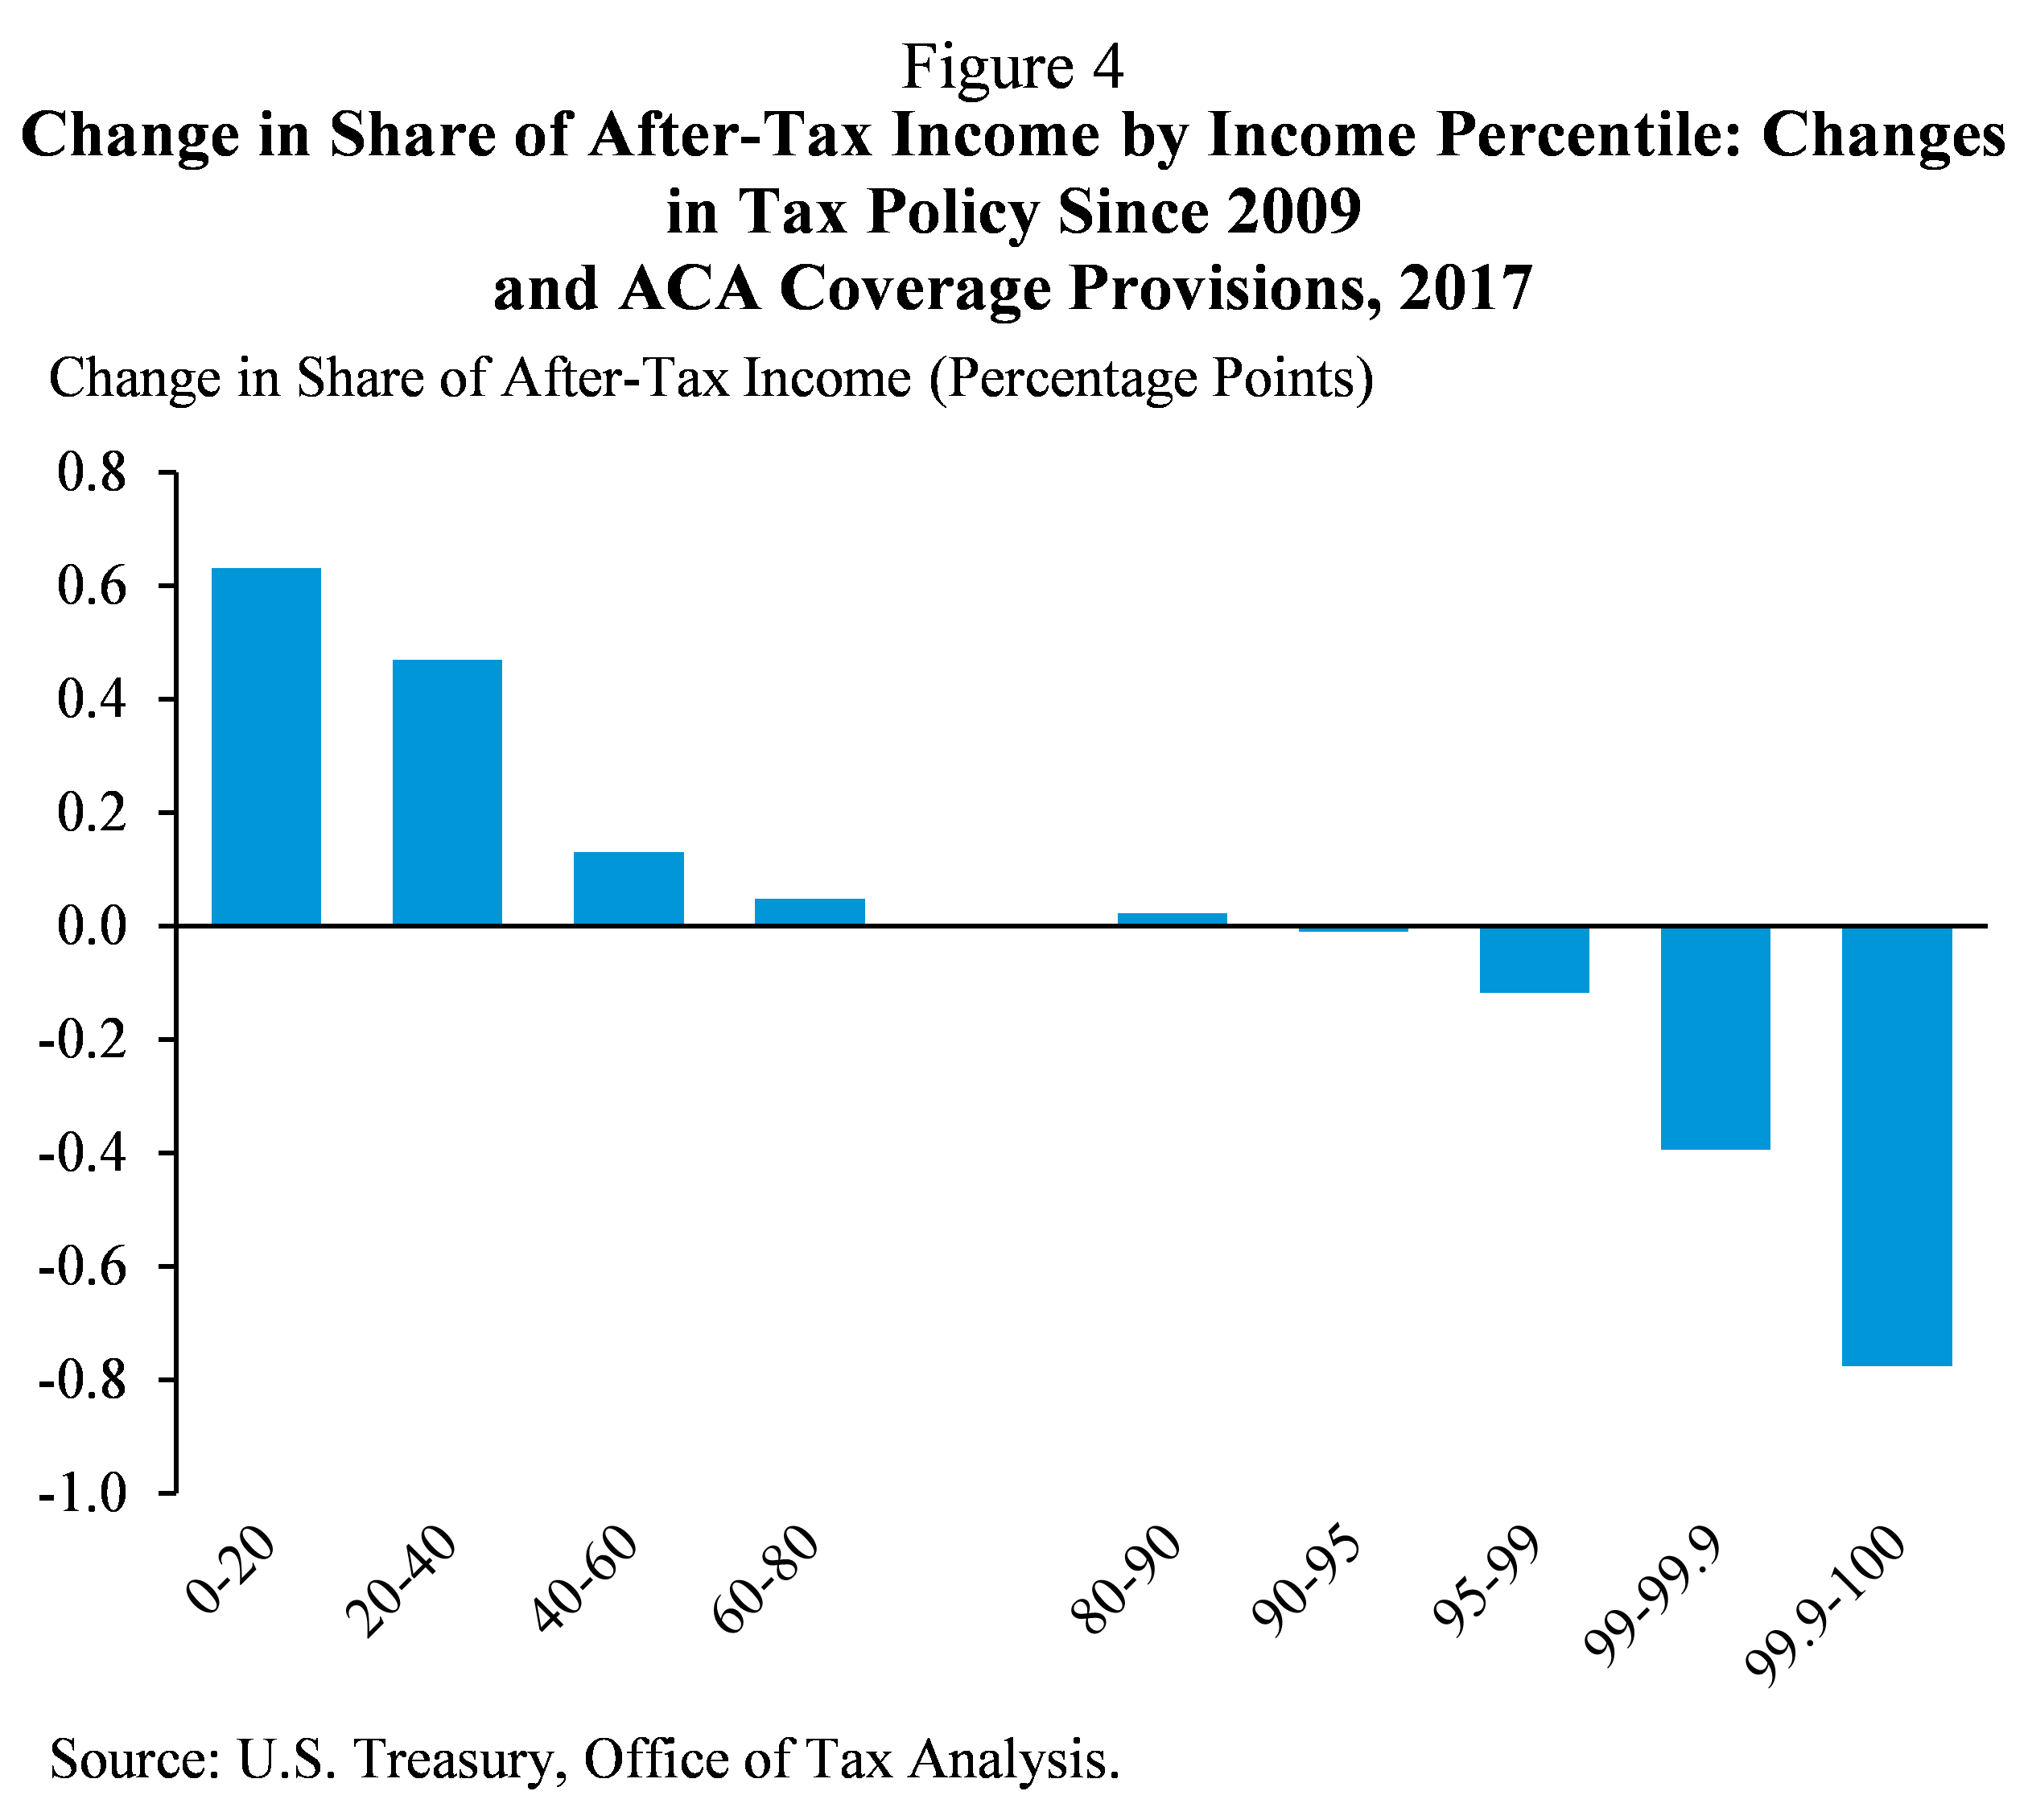 Figure 4. Change in Share of After-Tax Income by Income Percentile: Changes in Tax Policy Since 2009